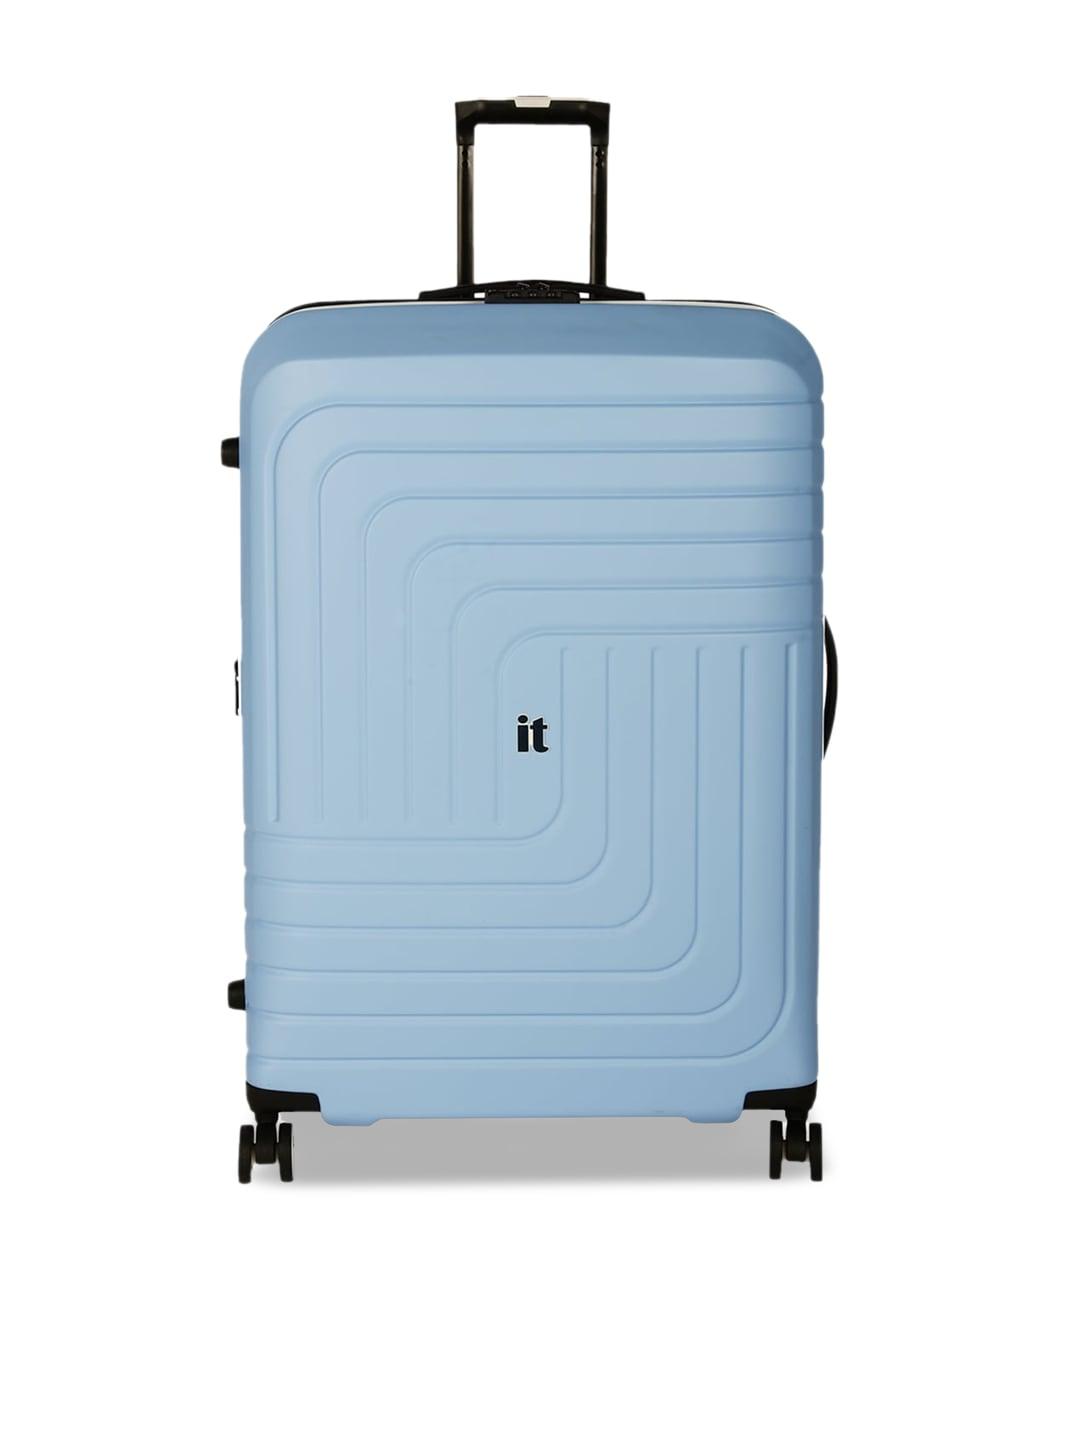 IT luggage Convolved Textured 28 inches Hard-Sided 360-Degree Rotation Trolley Suitcase